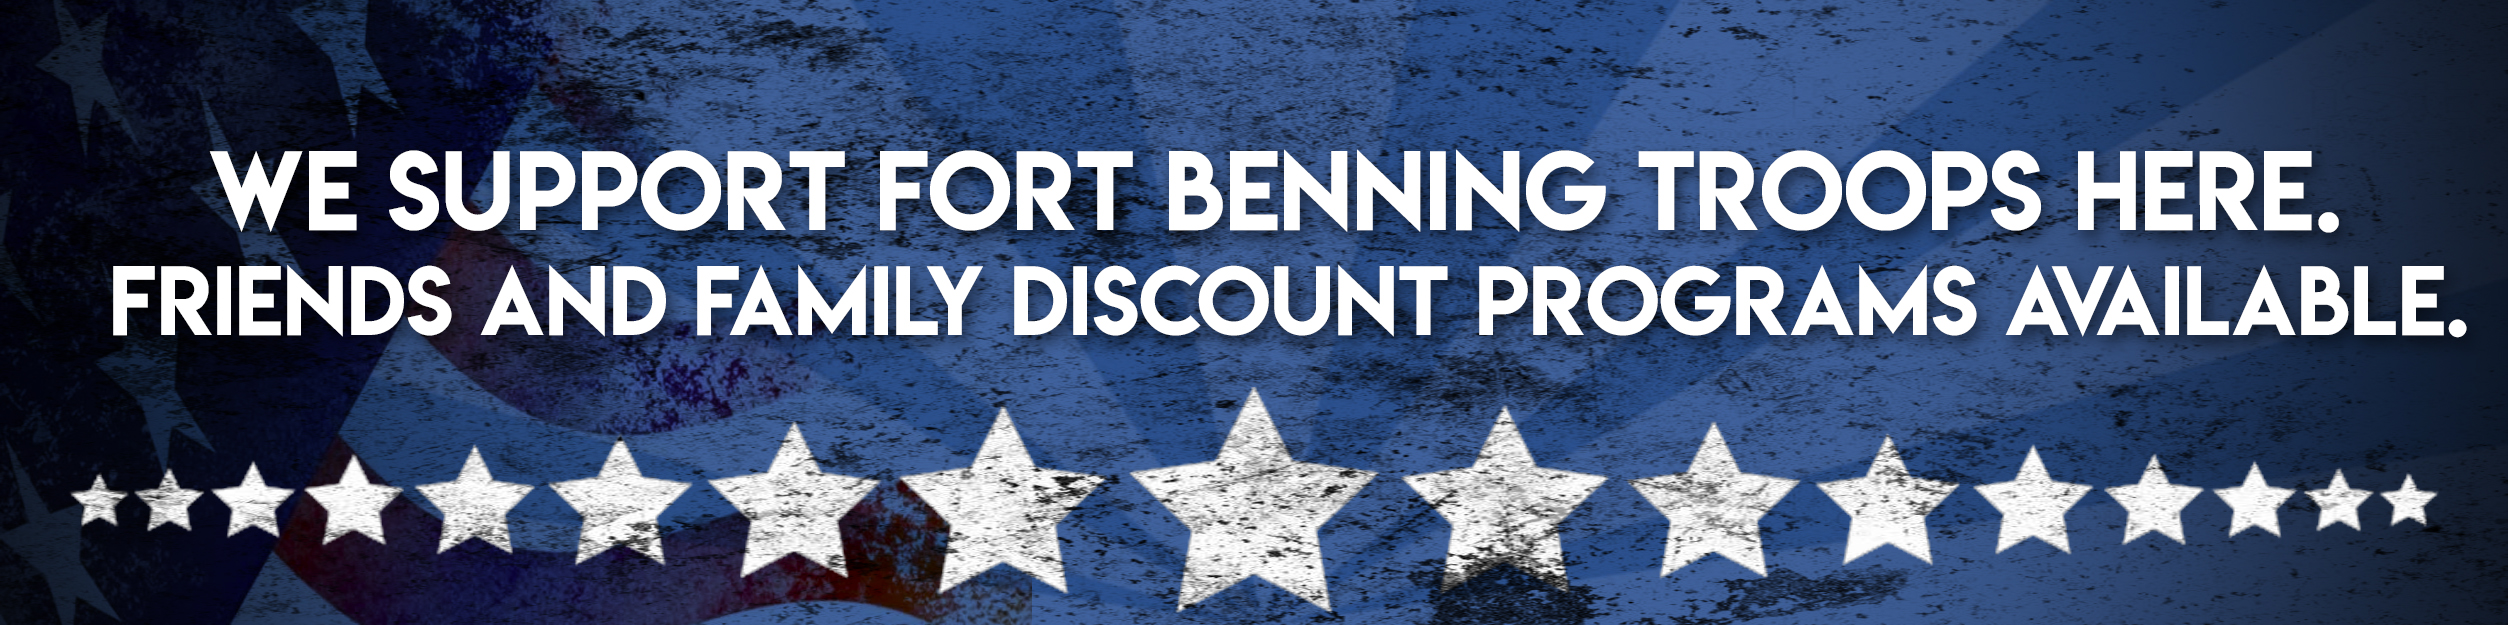 We support Fort Benning Troops. Friends and Family Discounts also Available!